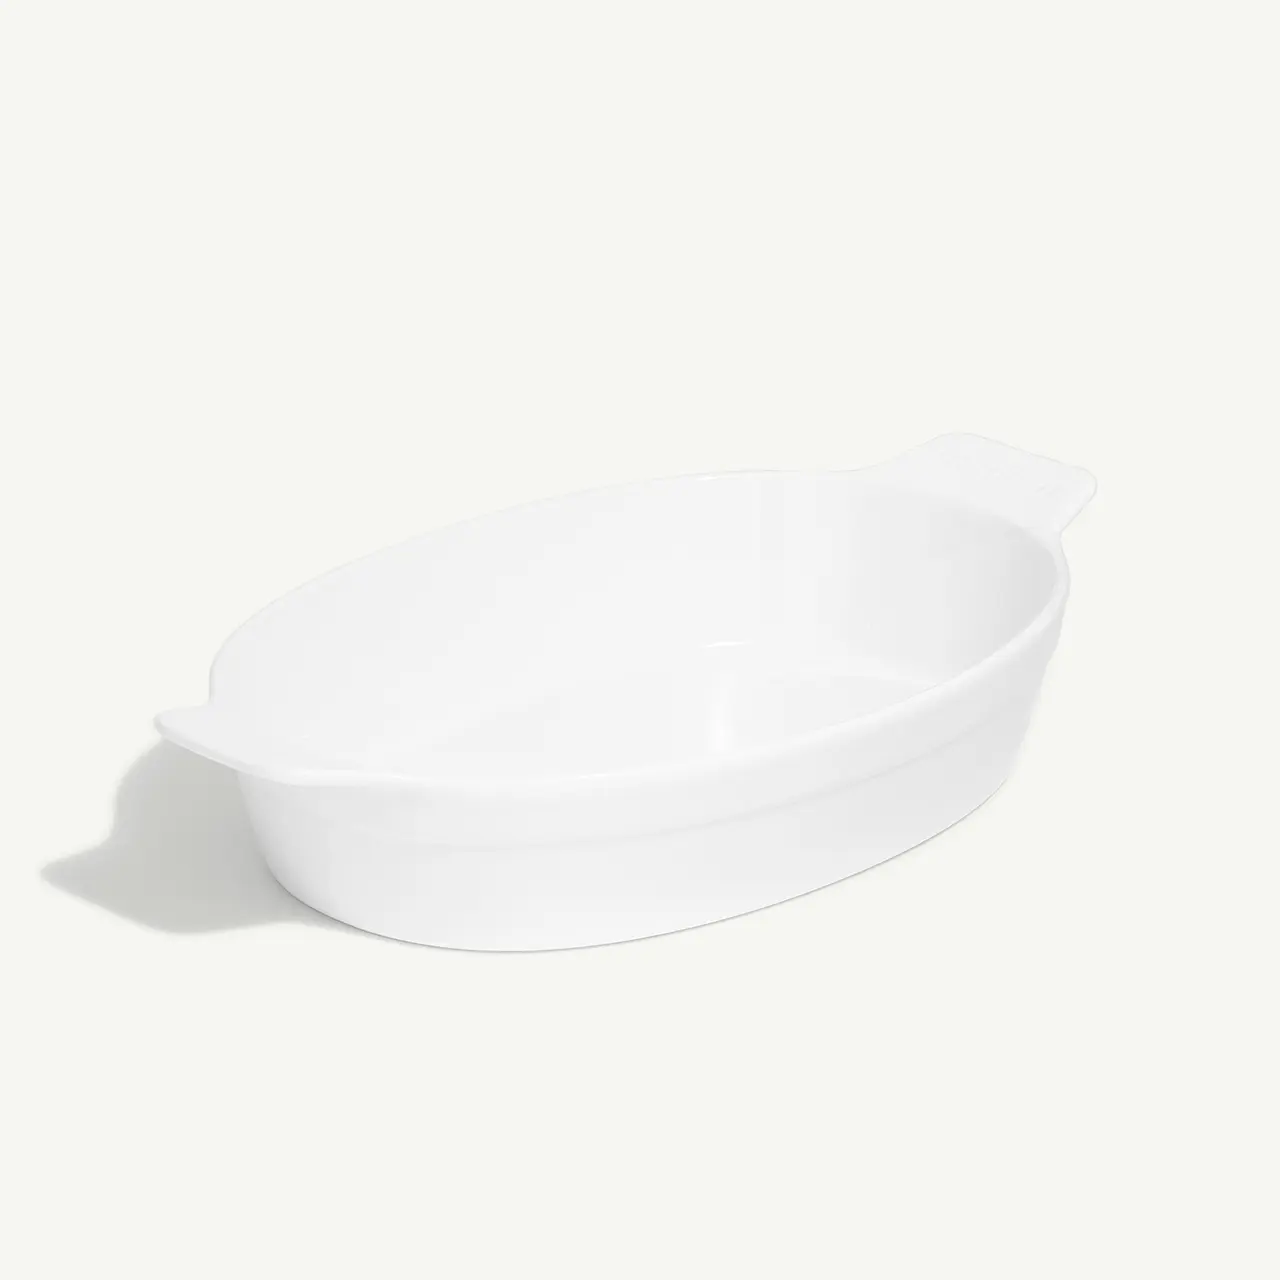 A white ceramic oval baking dish on a plain background.